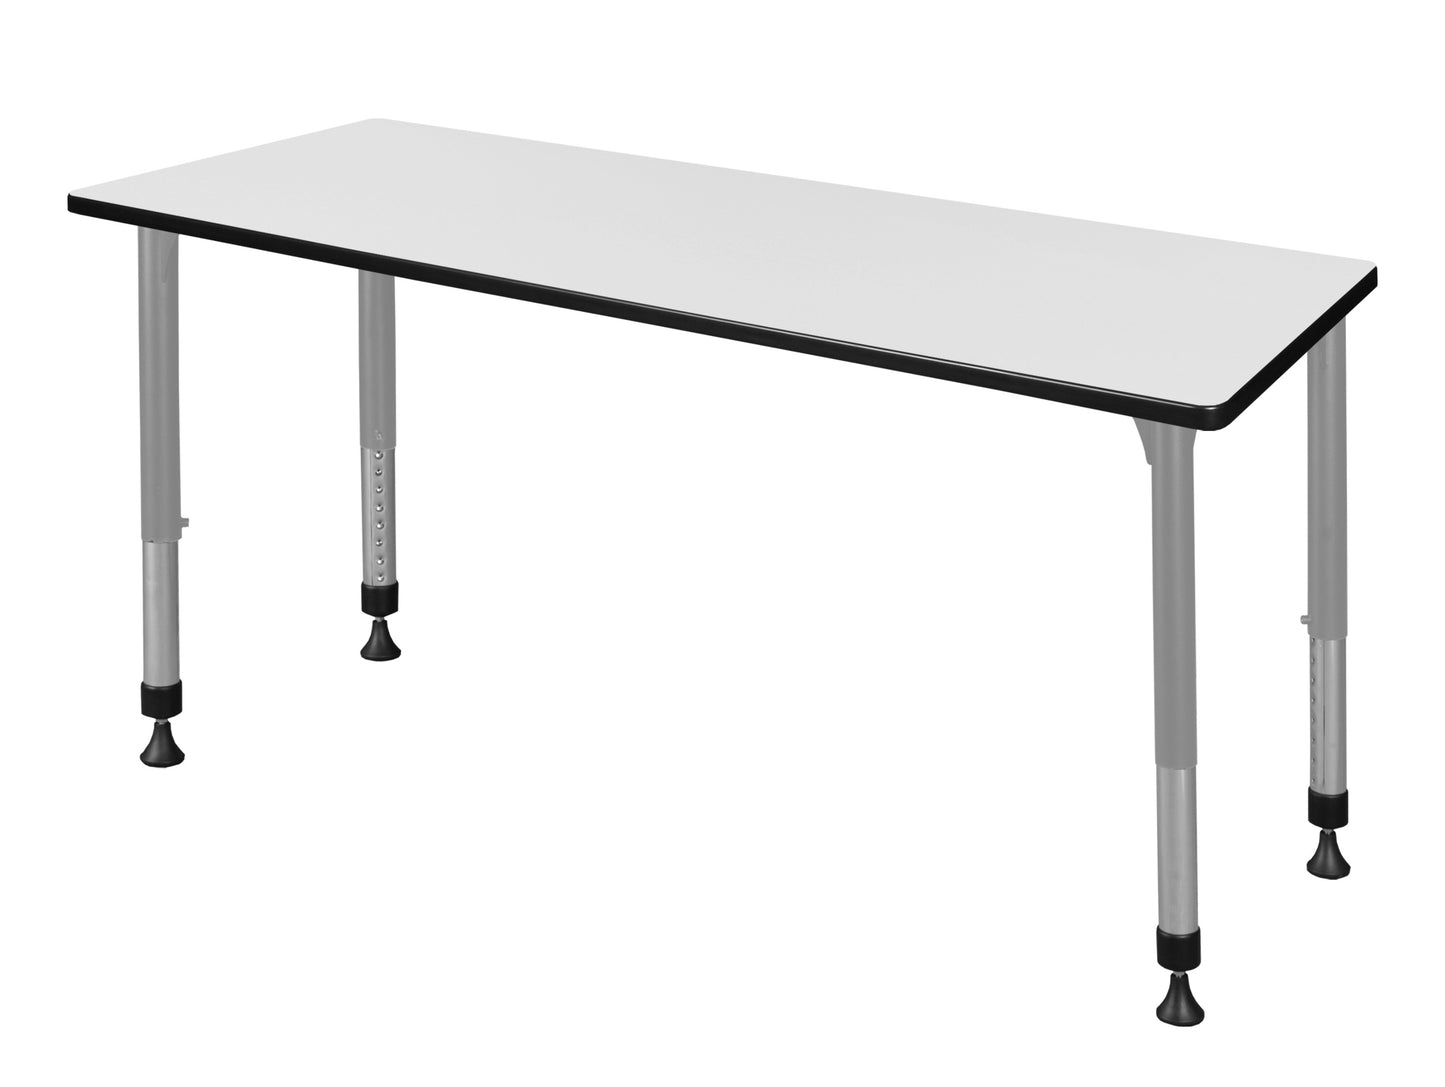 Regency Kee 66 x 24 in. Height Adjustable Mobile Classroom Activity Table